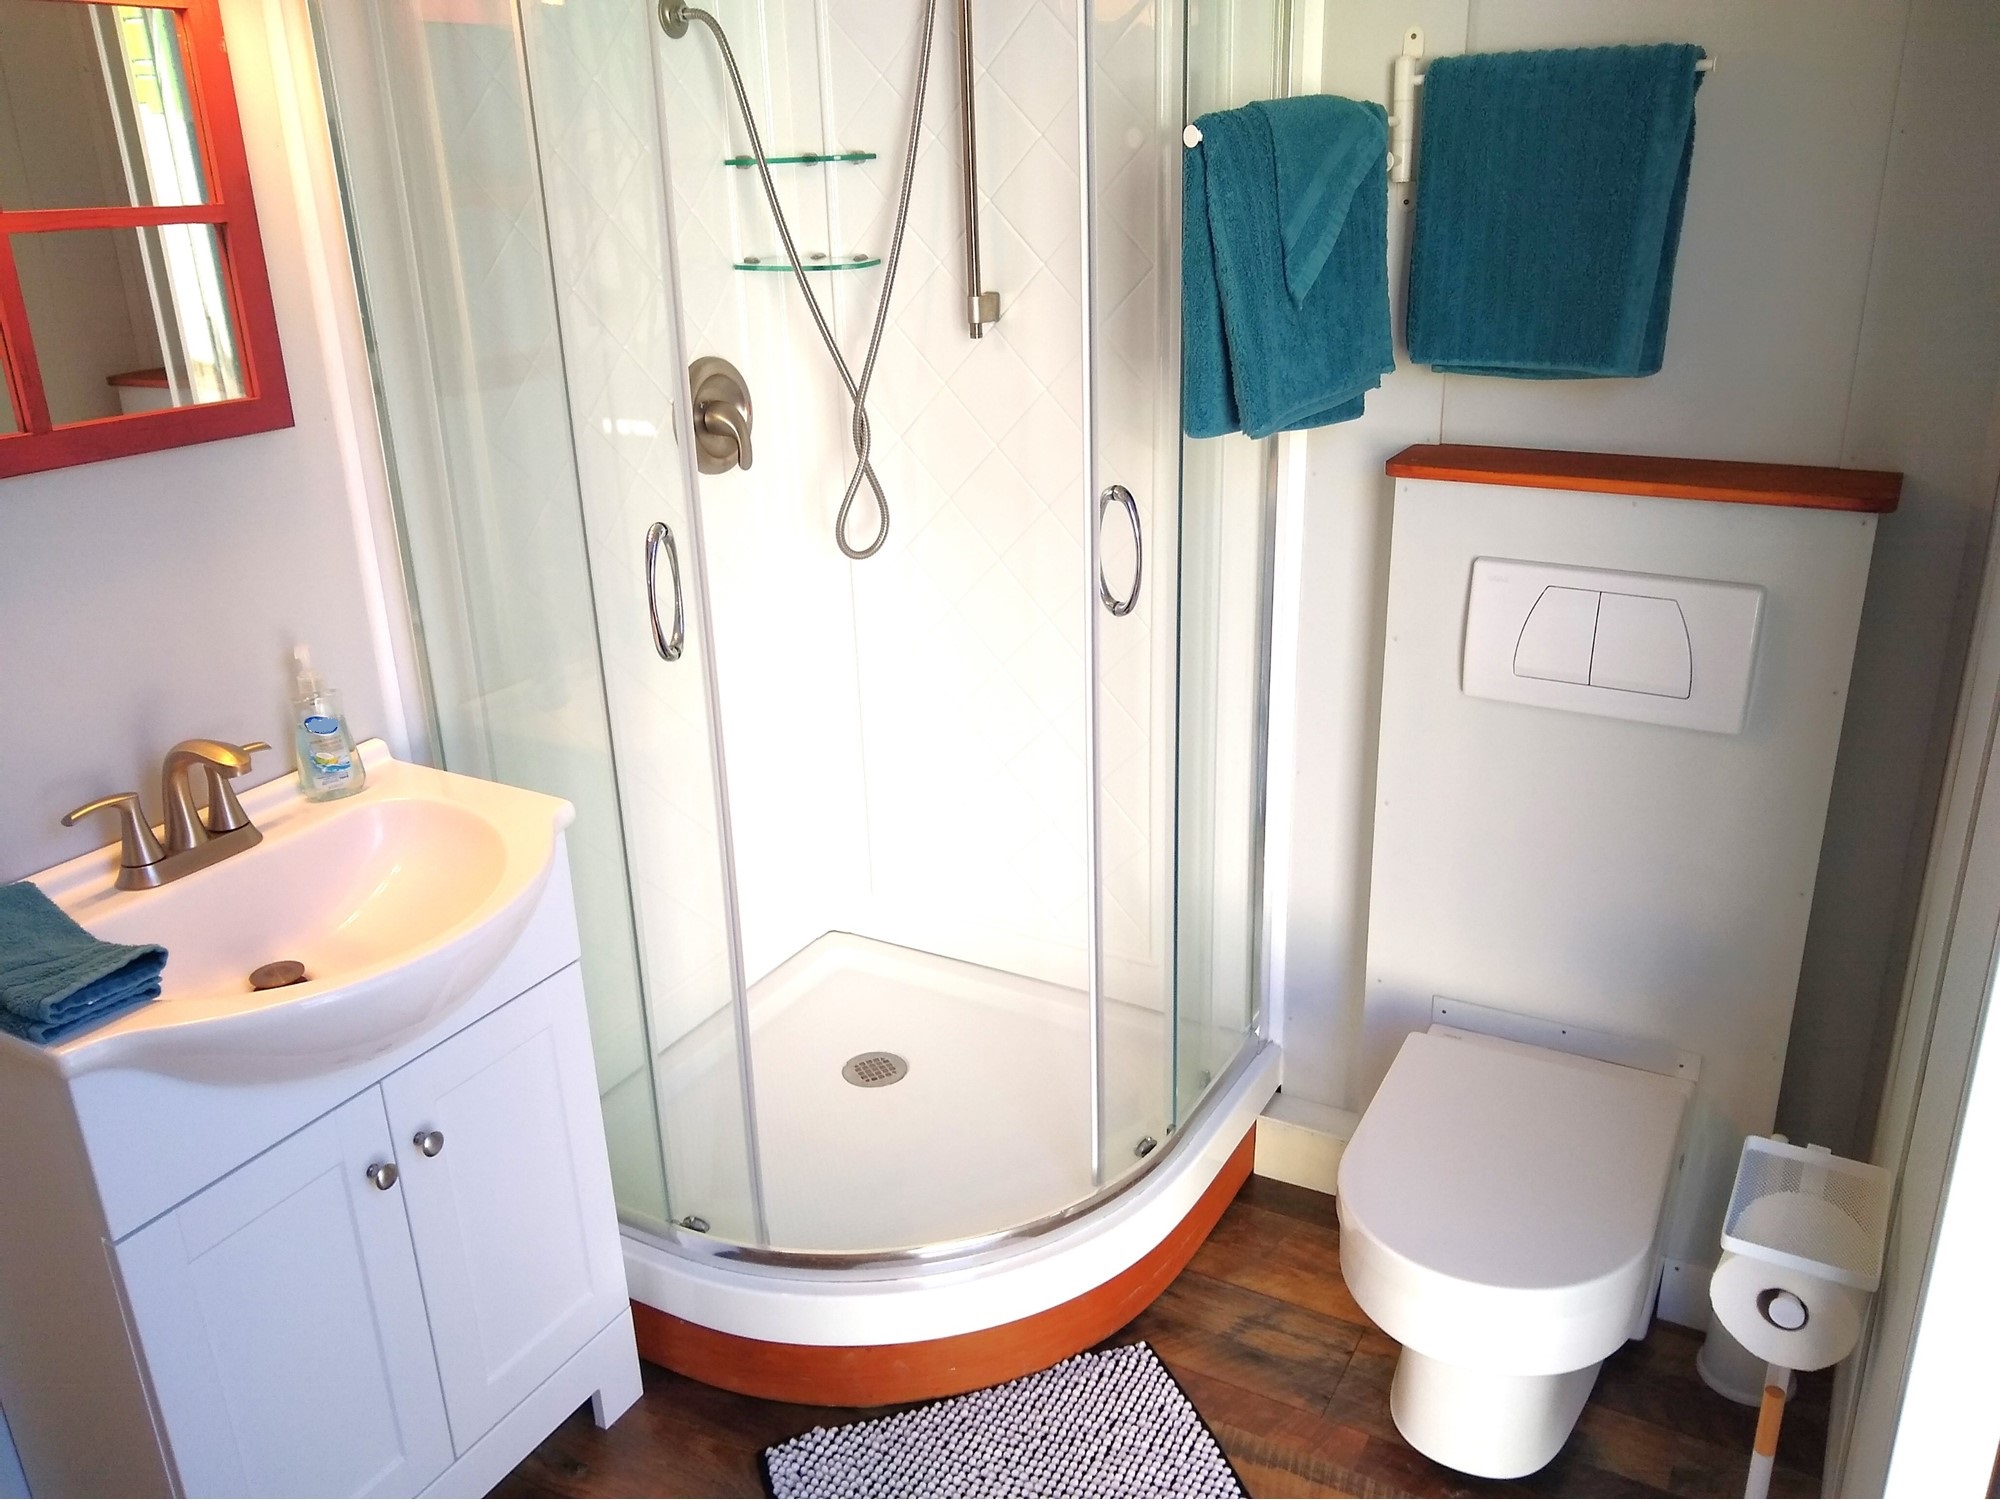 Over-sized bathroom with a modern flushing toilet